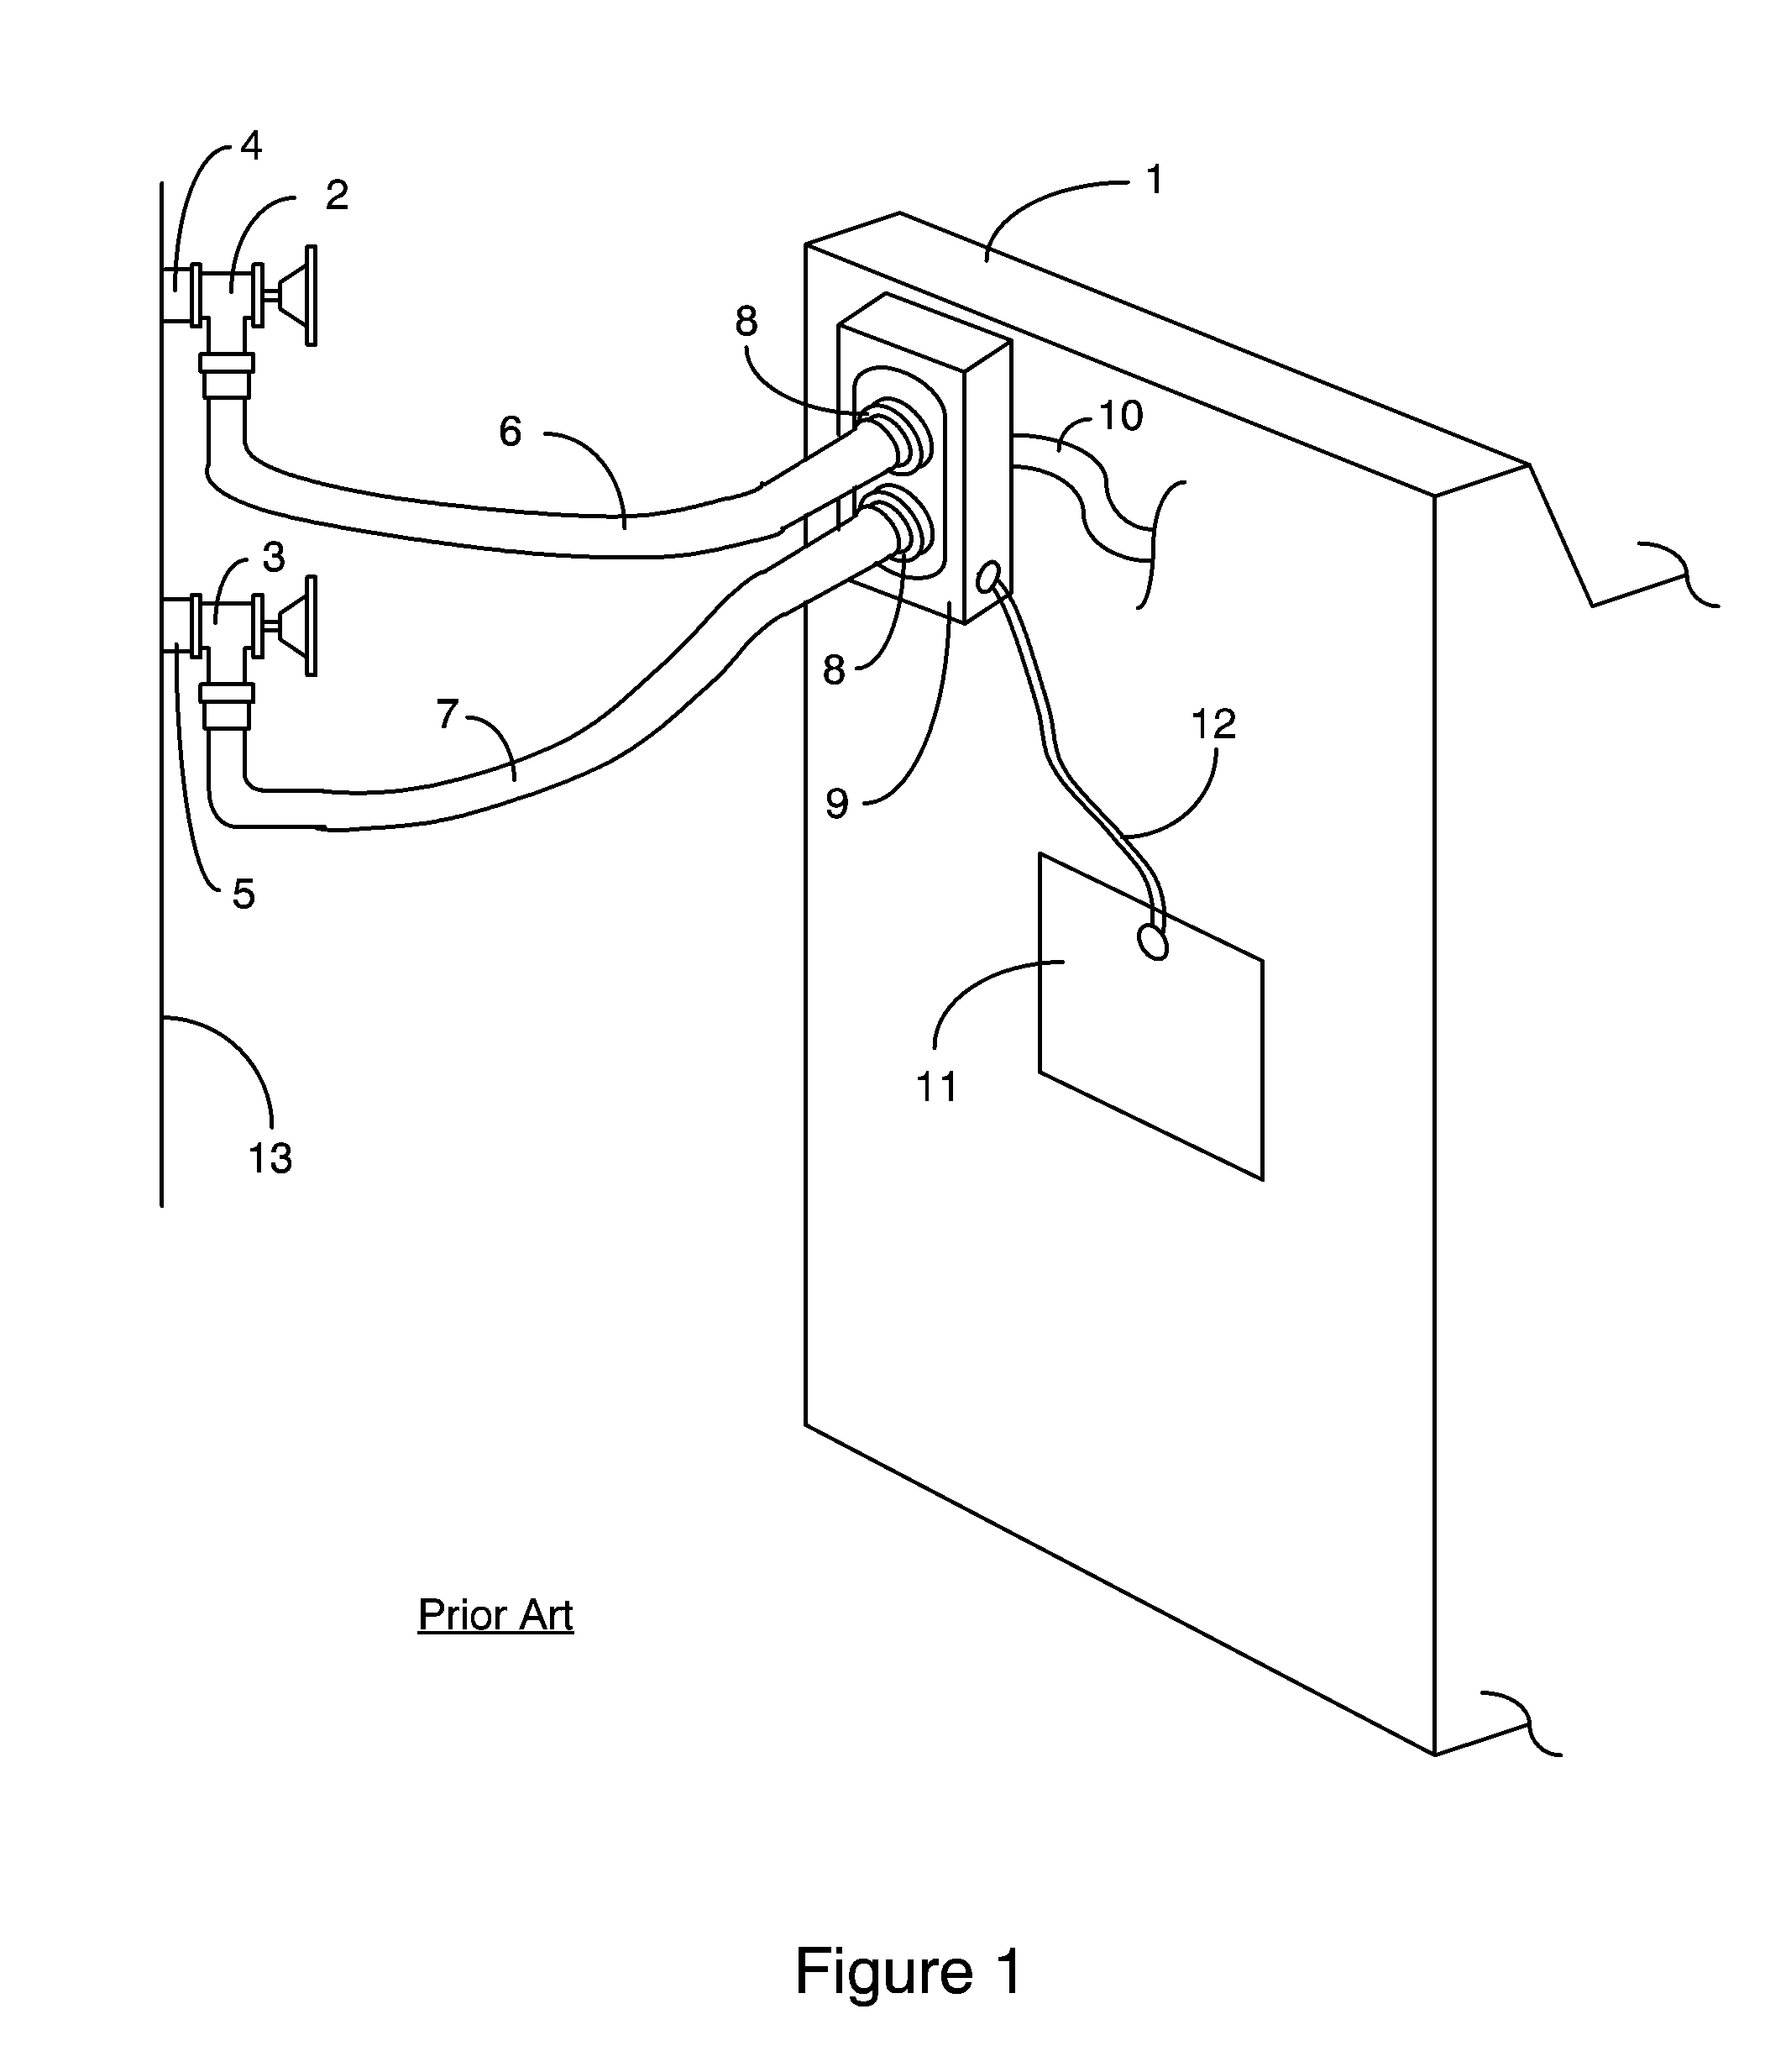 Apparatus And Method For Supplying Hot, Cold Or Mixed Water To A Washing Machine Using A Single Water Supply Hose